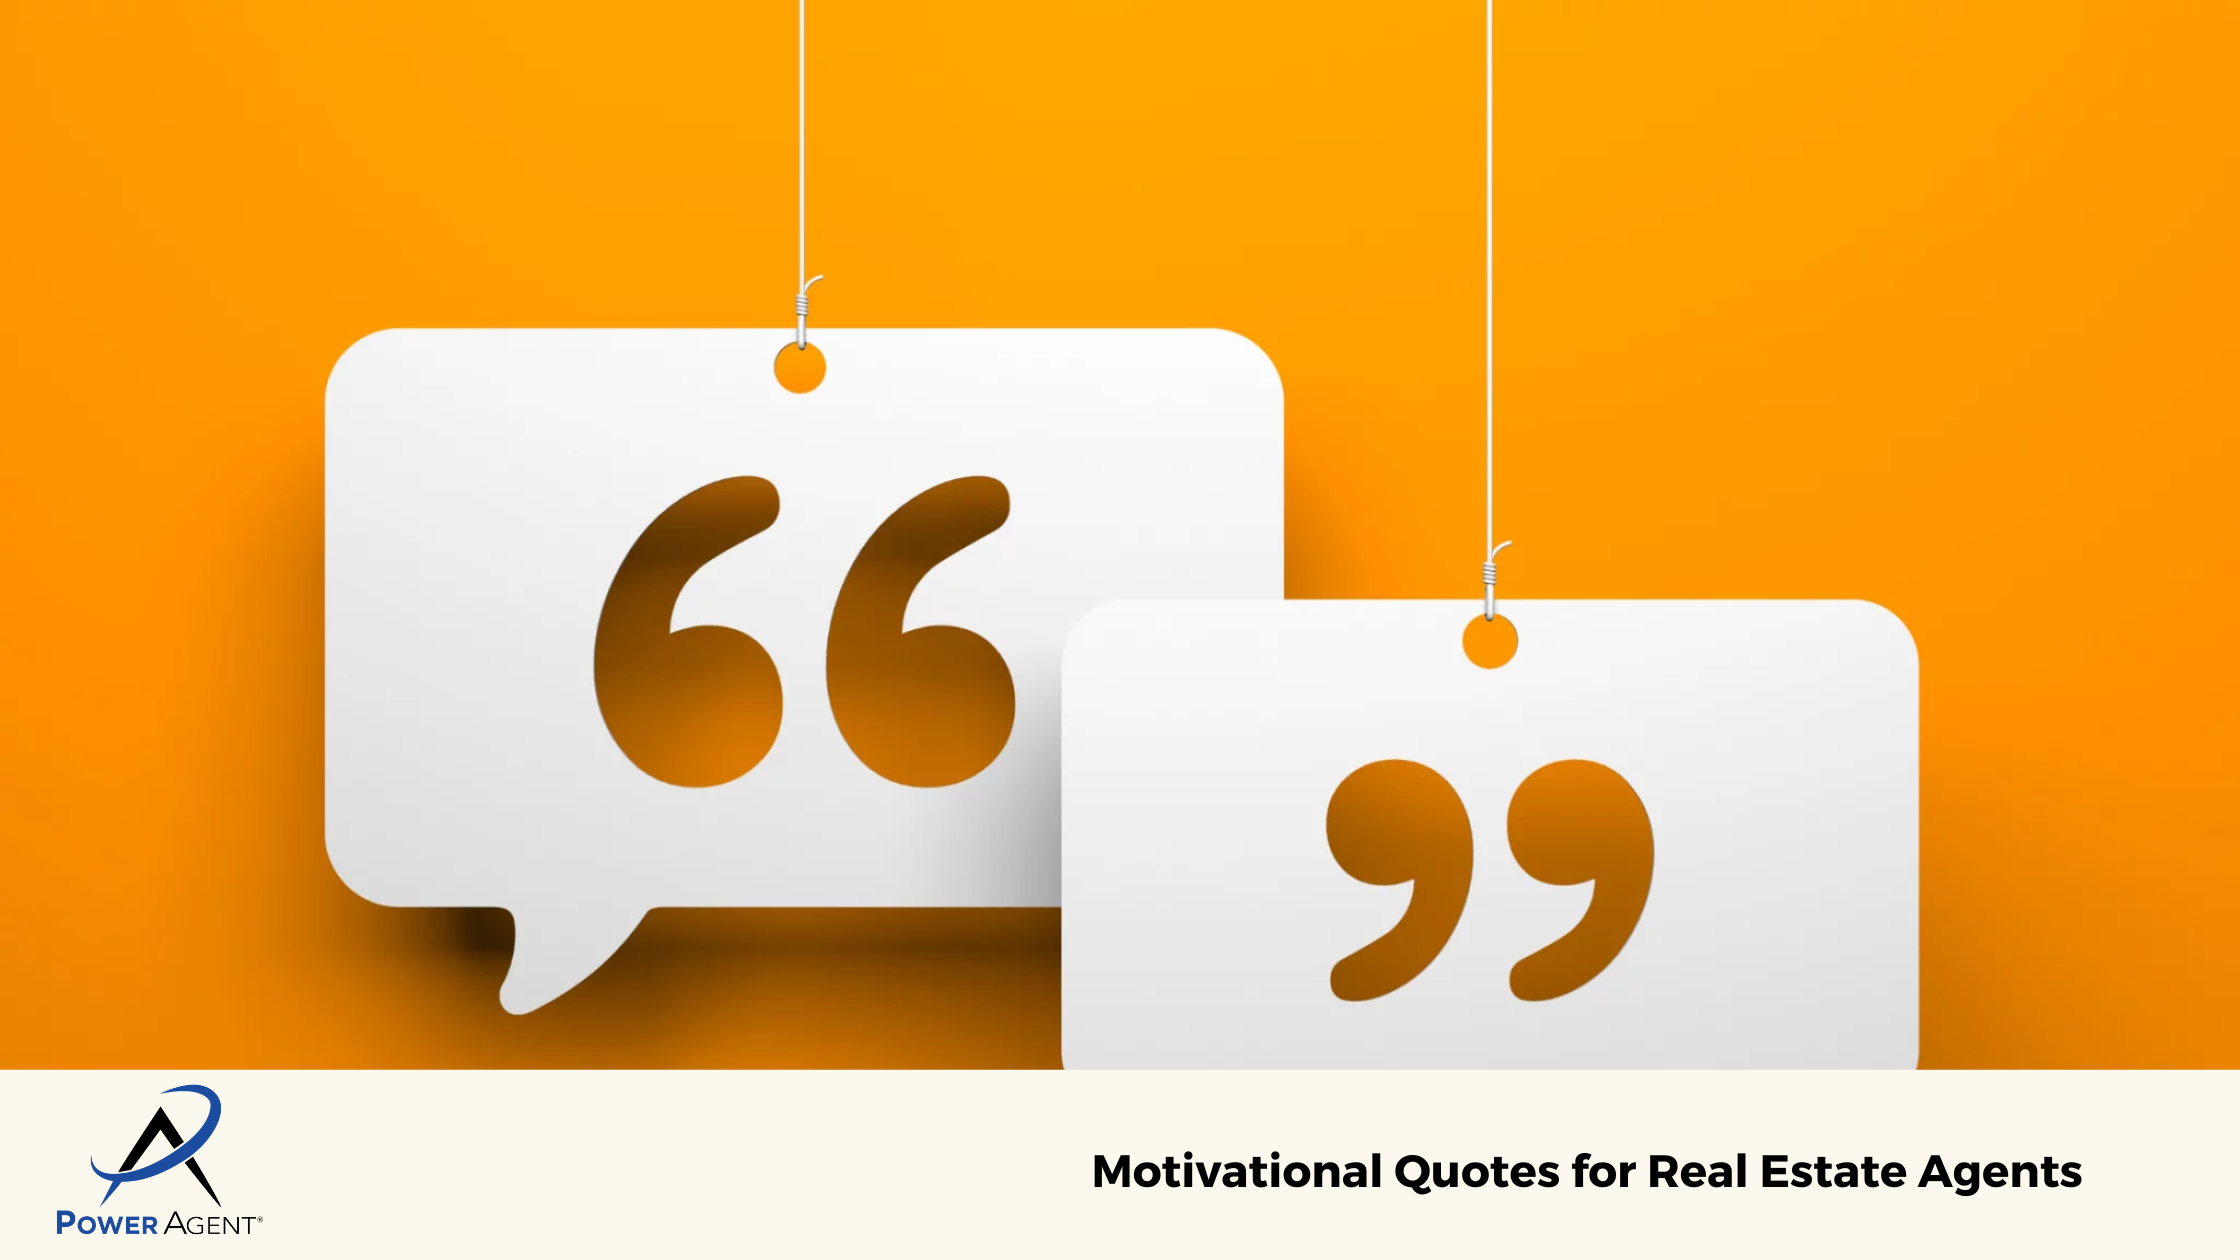 Motivational Quotes for Real Estate Agents